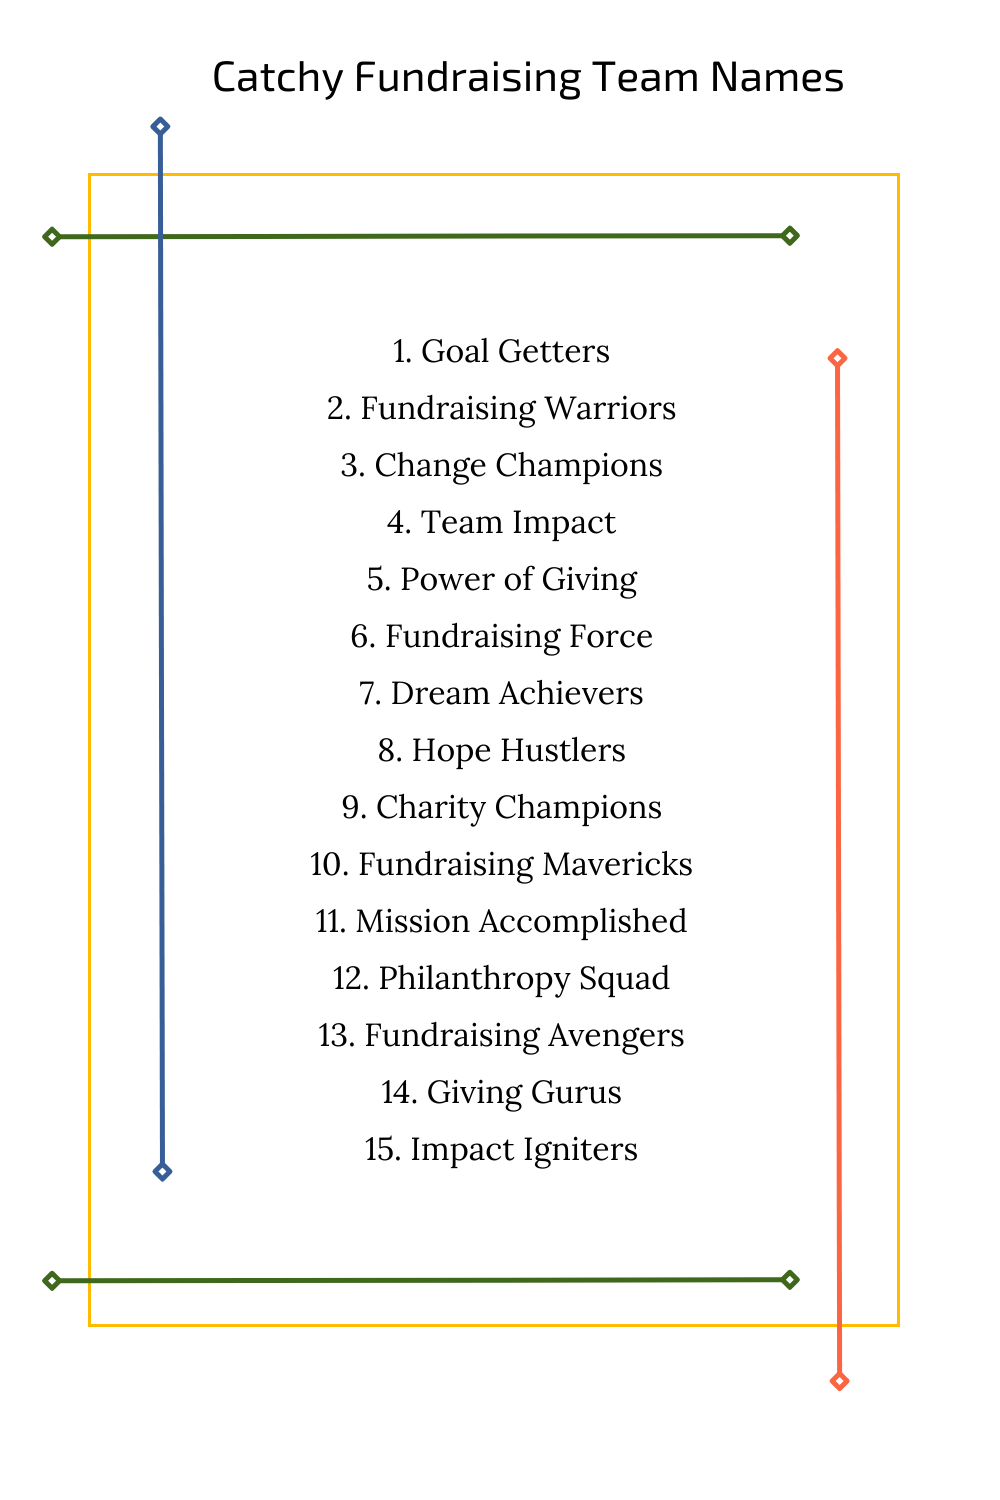 Catchy Fundraising Team Names